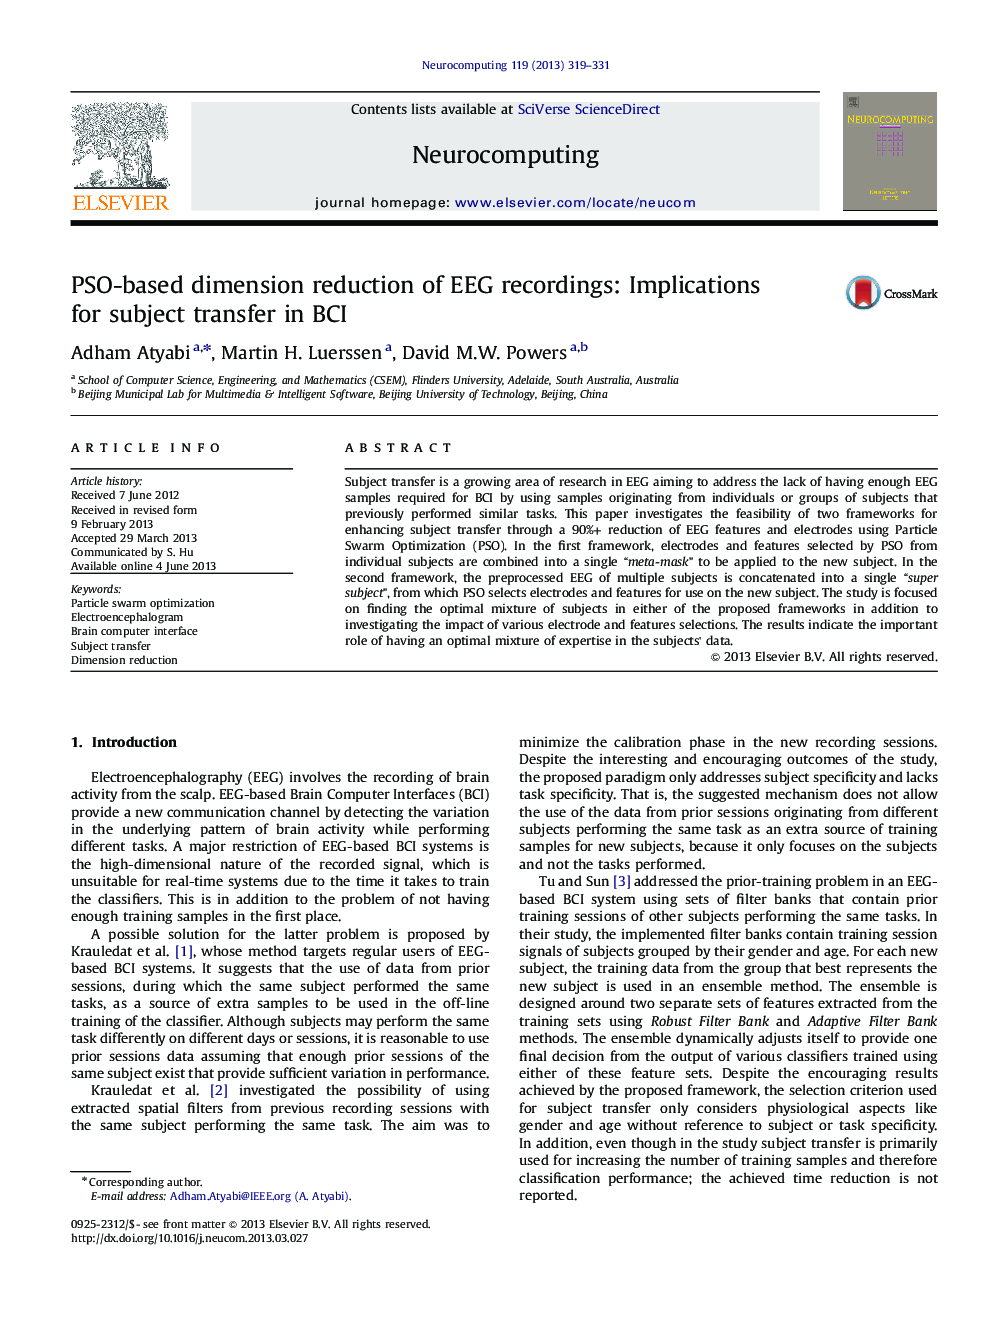 PSO-based dimension reduction of EEG recordings: Implications for subject transfer in BCI